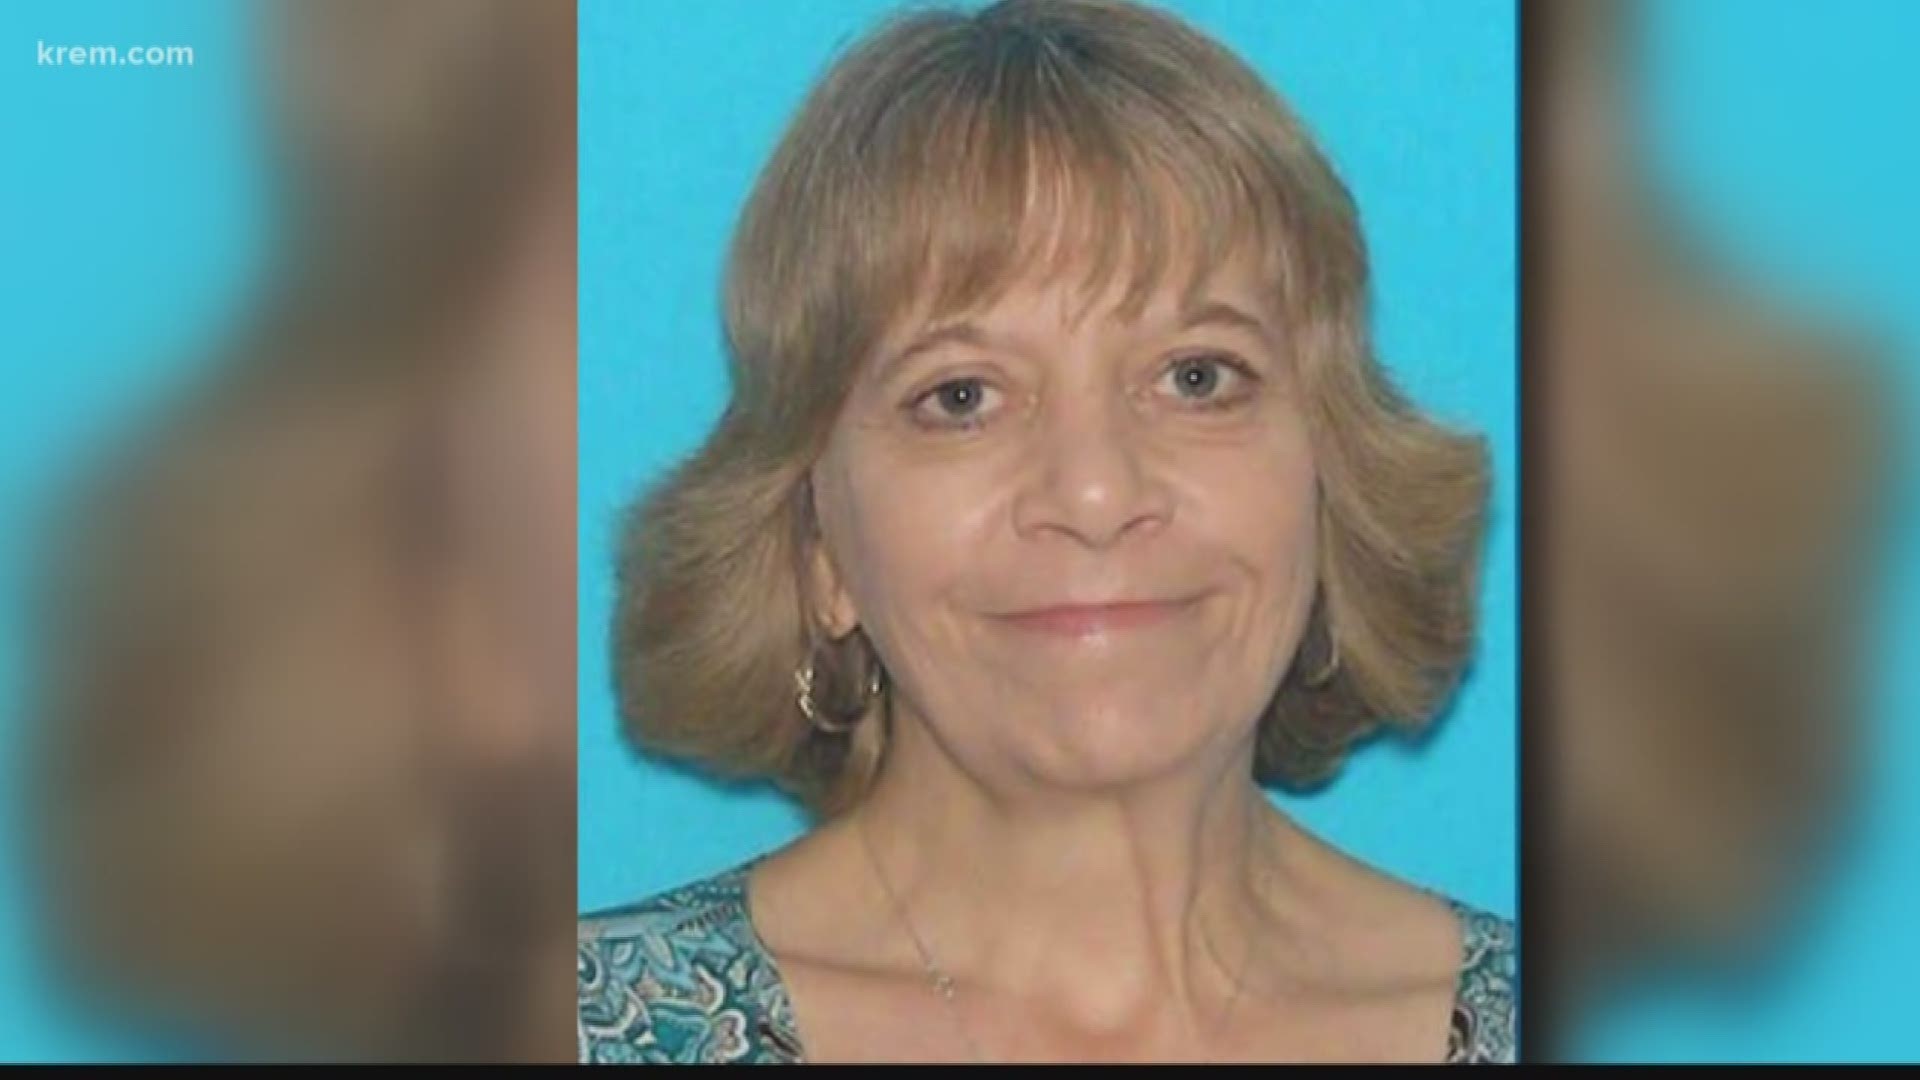 “It was just a miracle”: Stevens Co. woman found after 5 day search